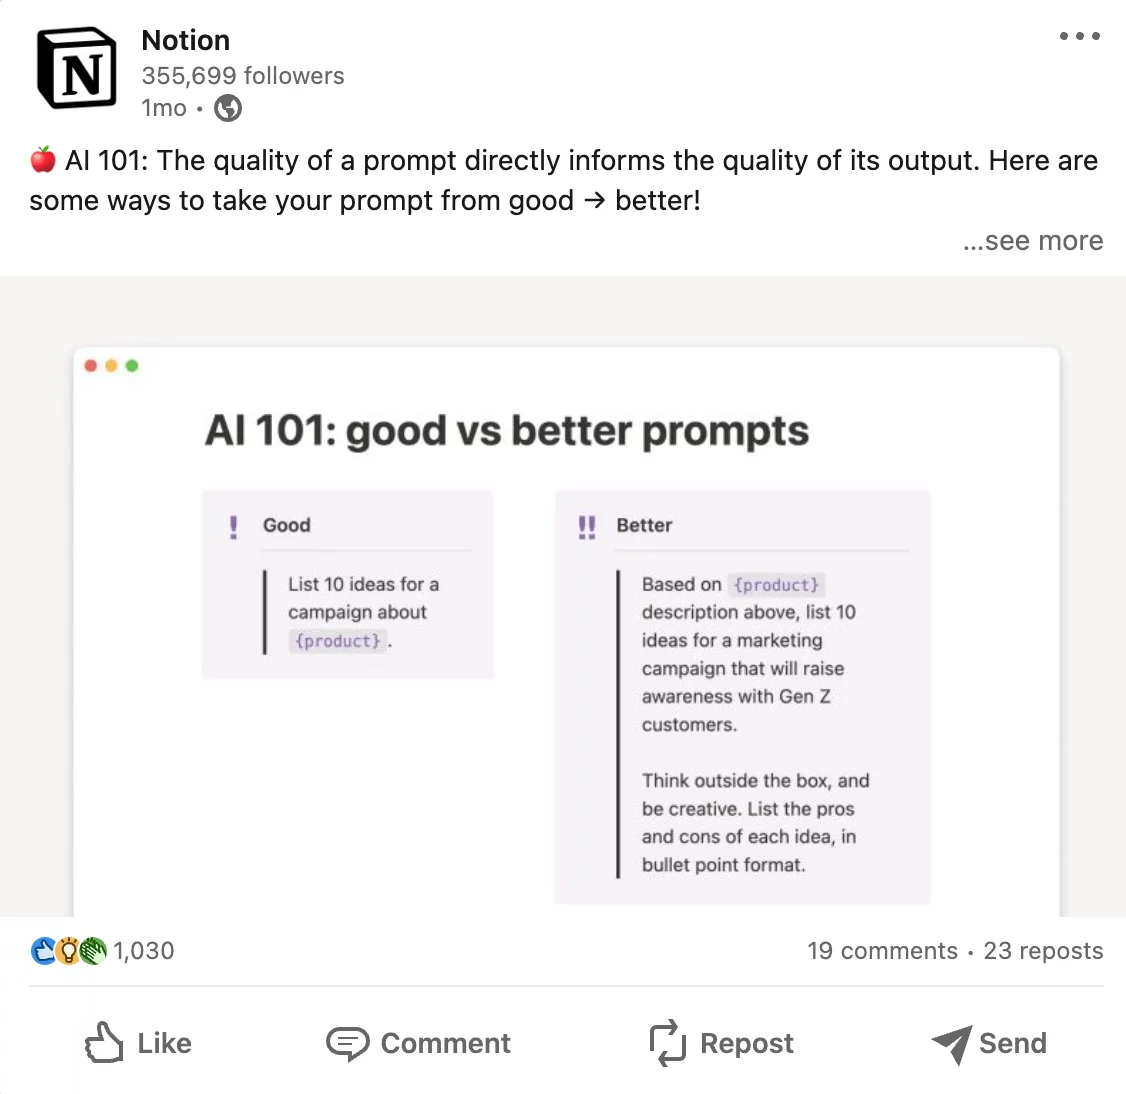 Helpful LinkedIn post from Notion sharing good vs better AI prompts